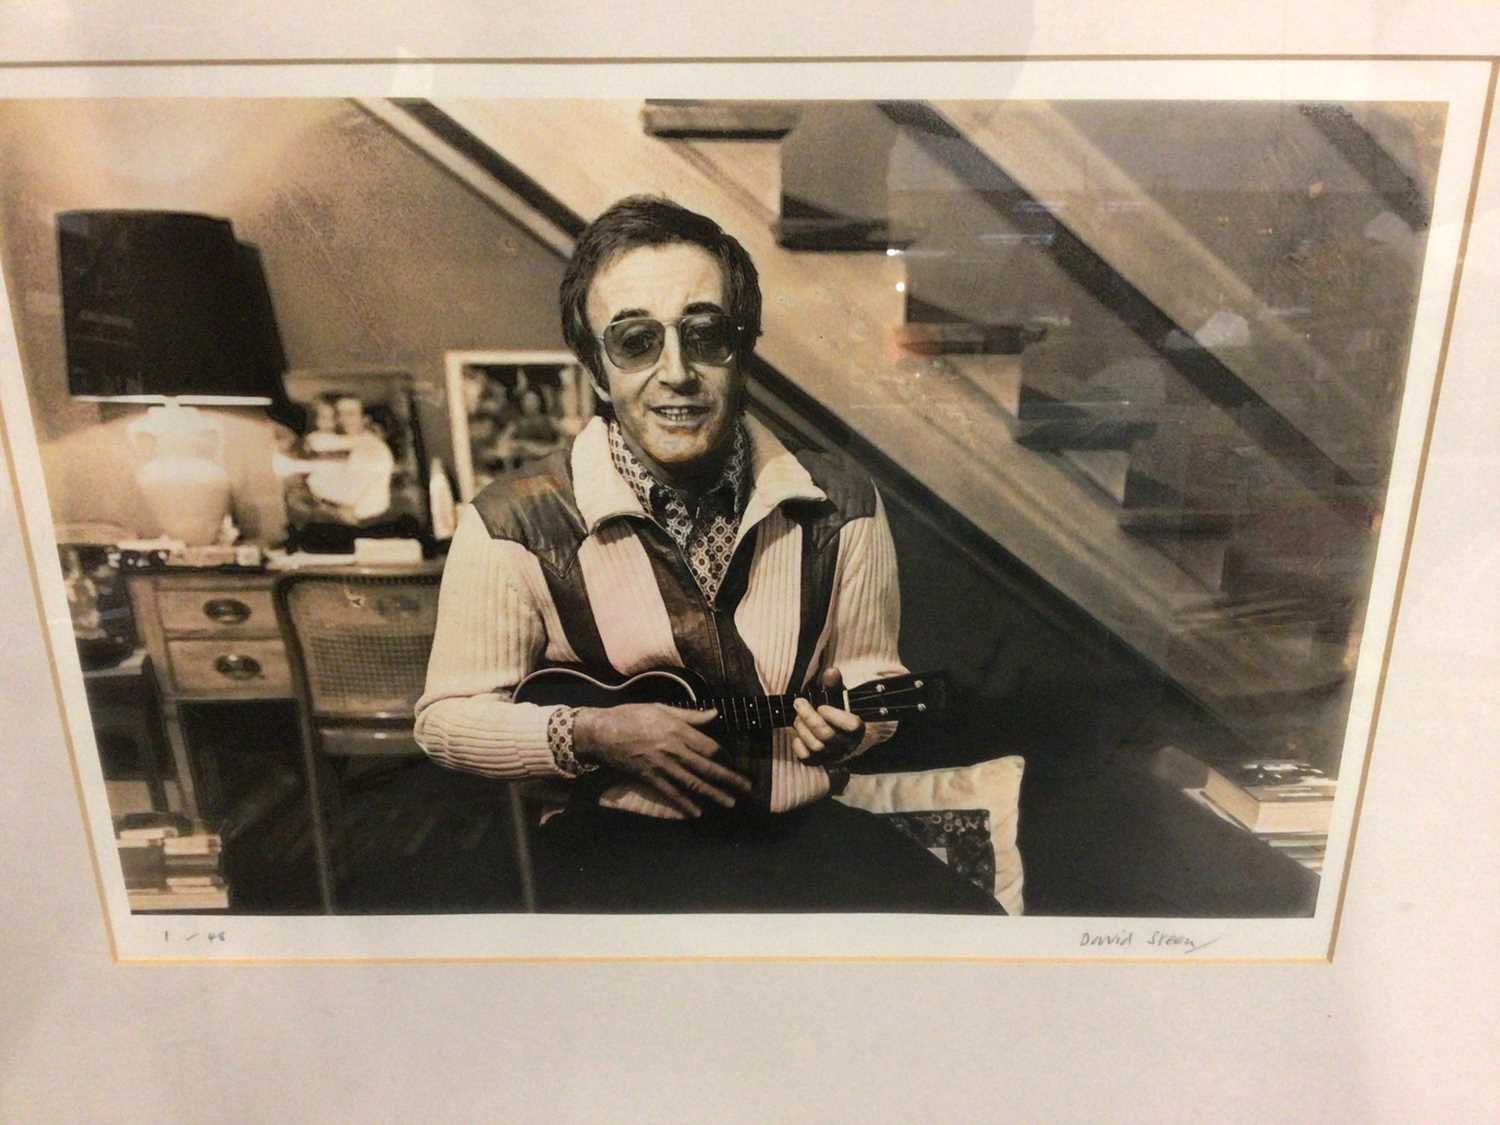 Framed limited edition print of Peter Sellers by David Steen (1936-2016)